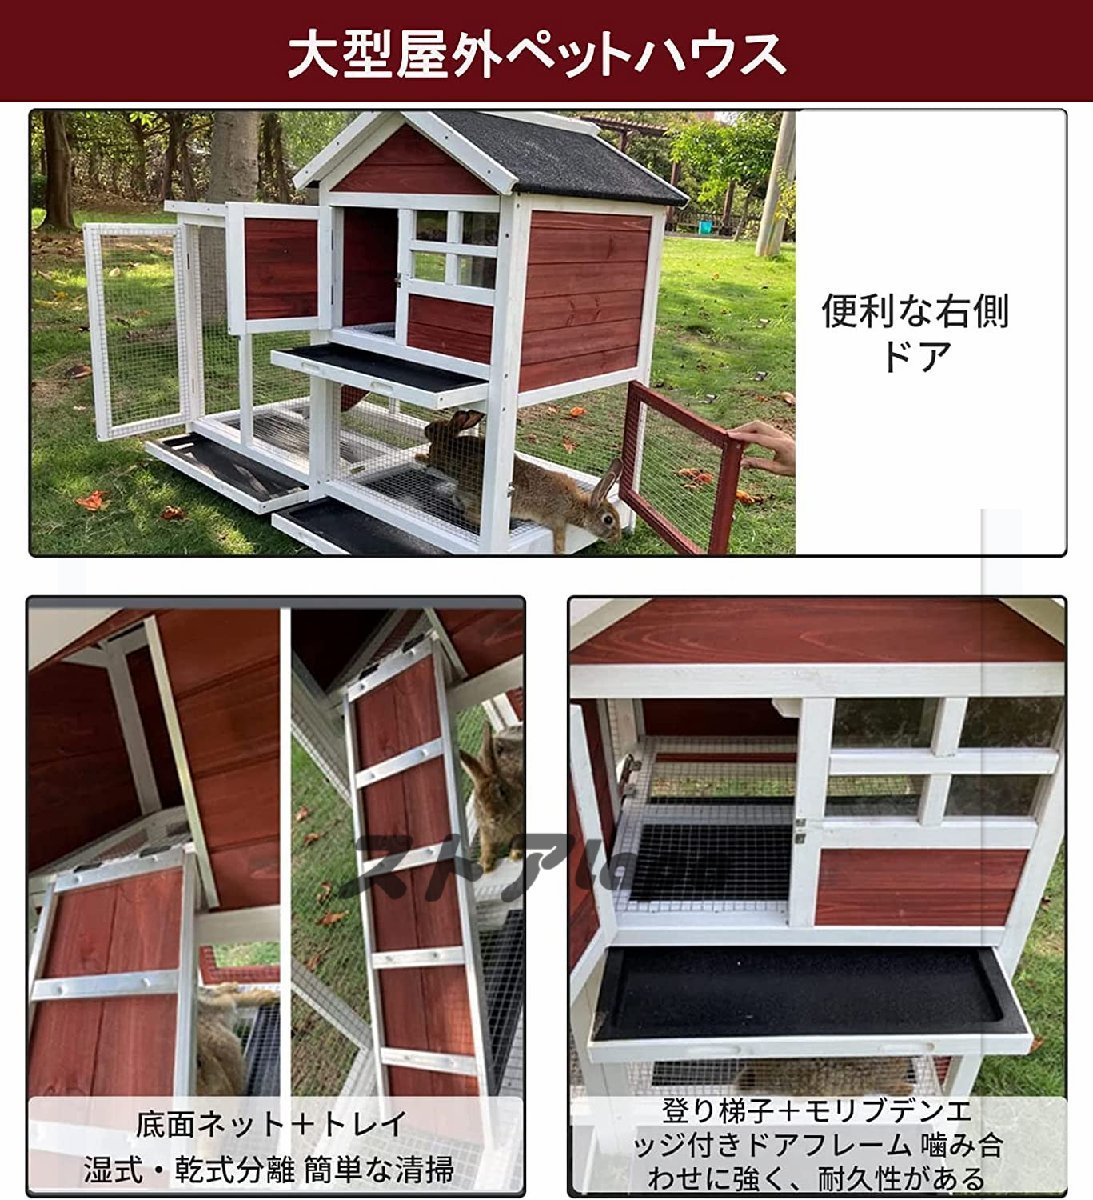  bargain sale rabbit cage ... small shop rabbit cage wooden small animals apartment men to Flat . outdoors rabbit cage outdoors two layer wooden chi gold small shop Y053